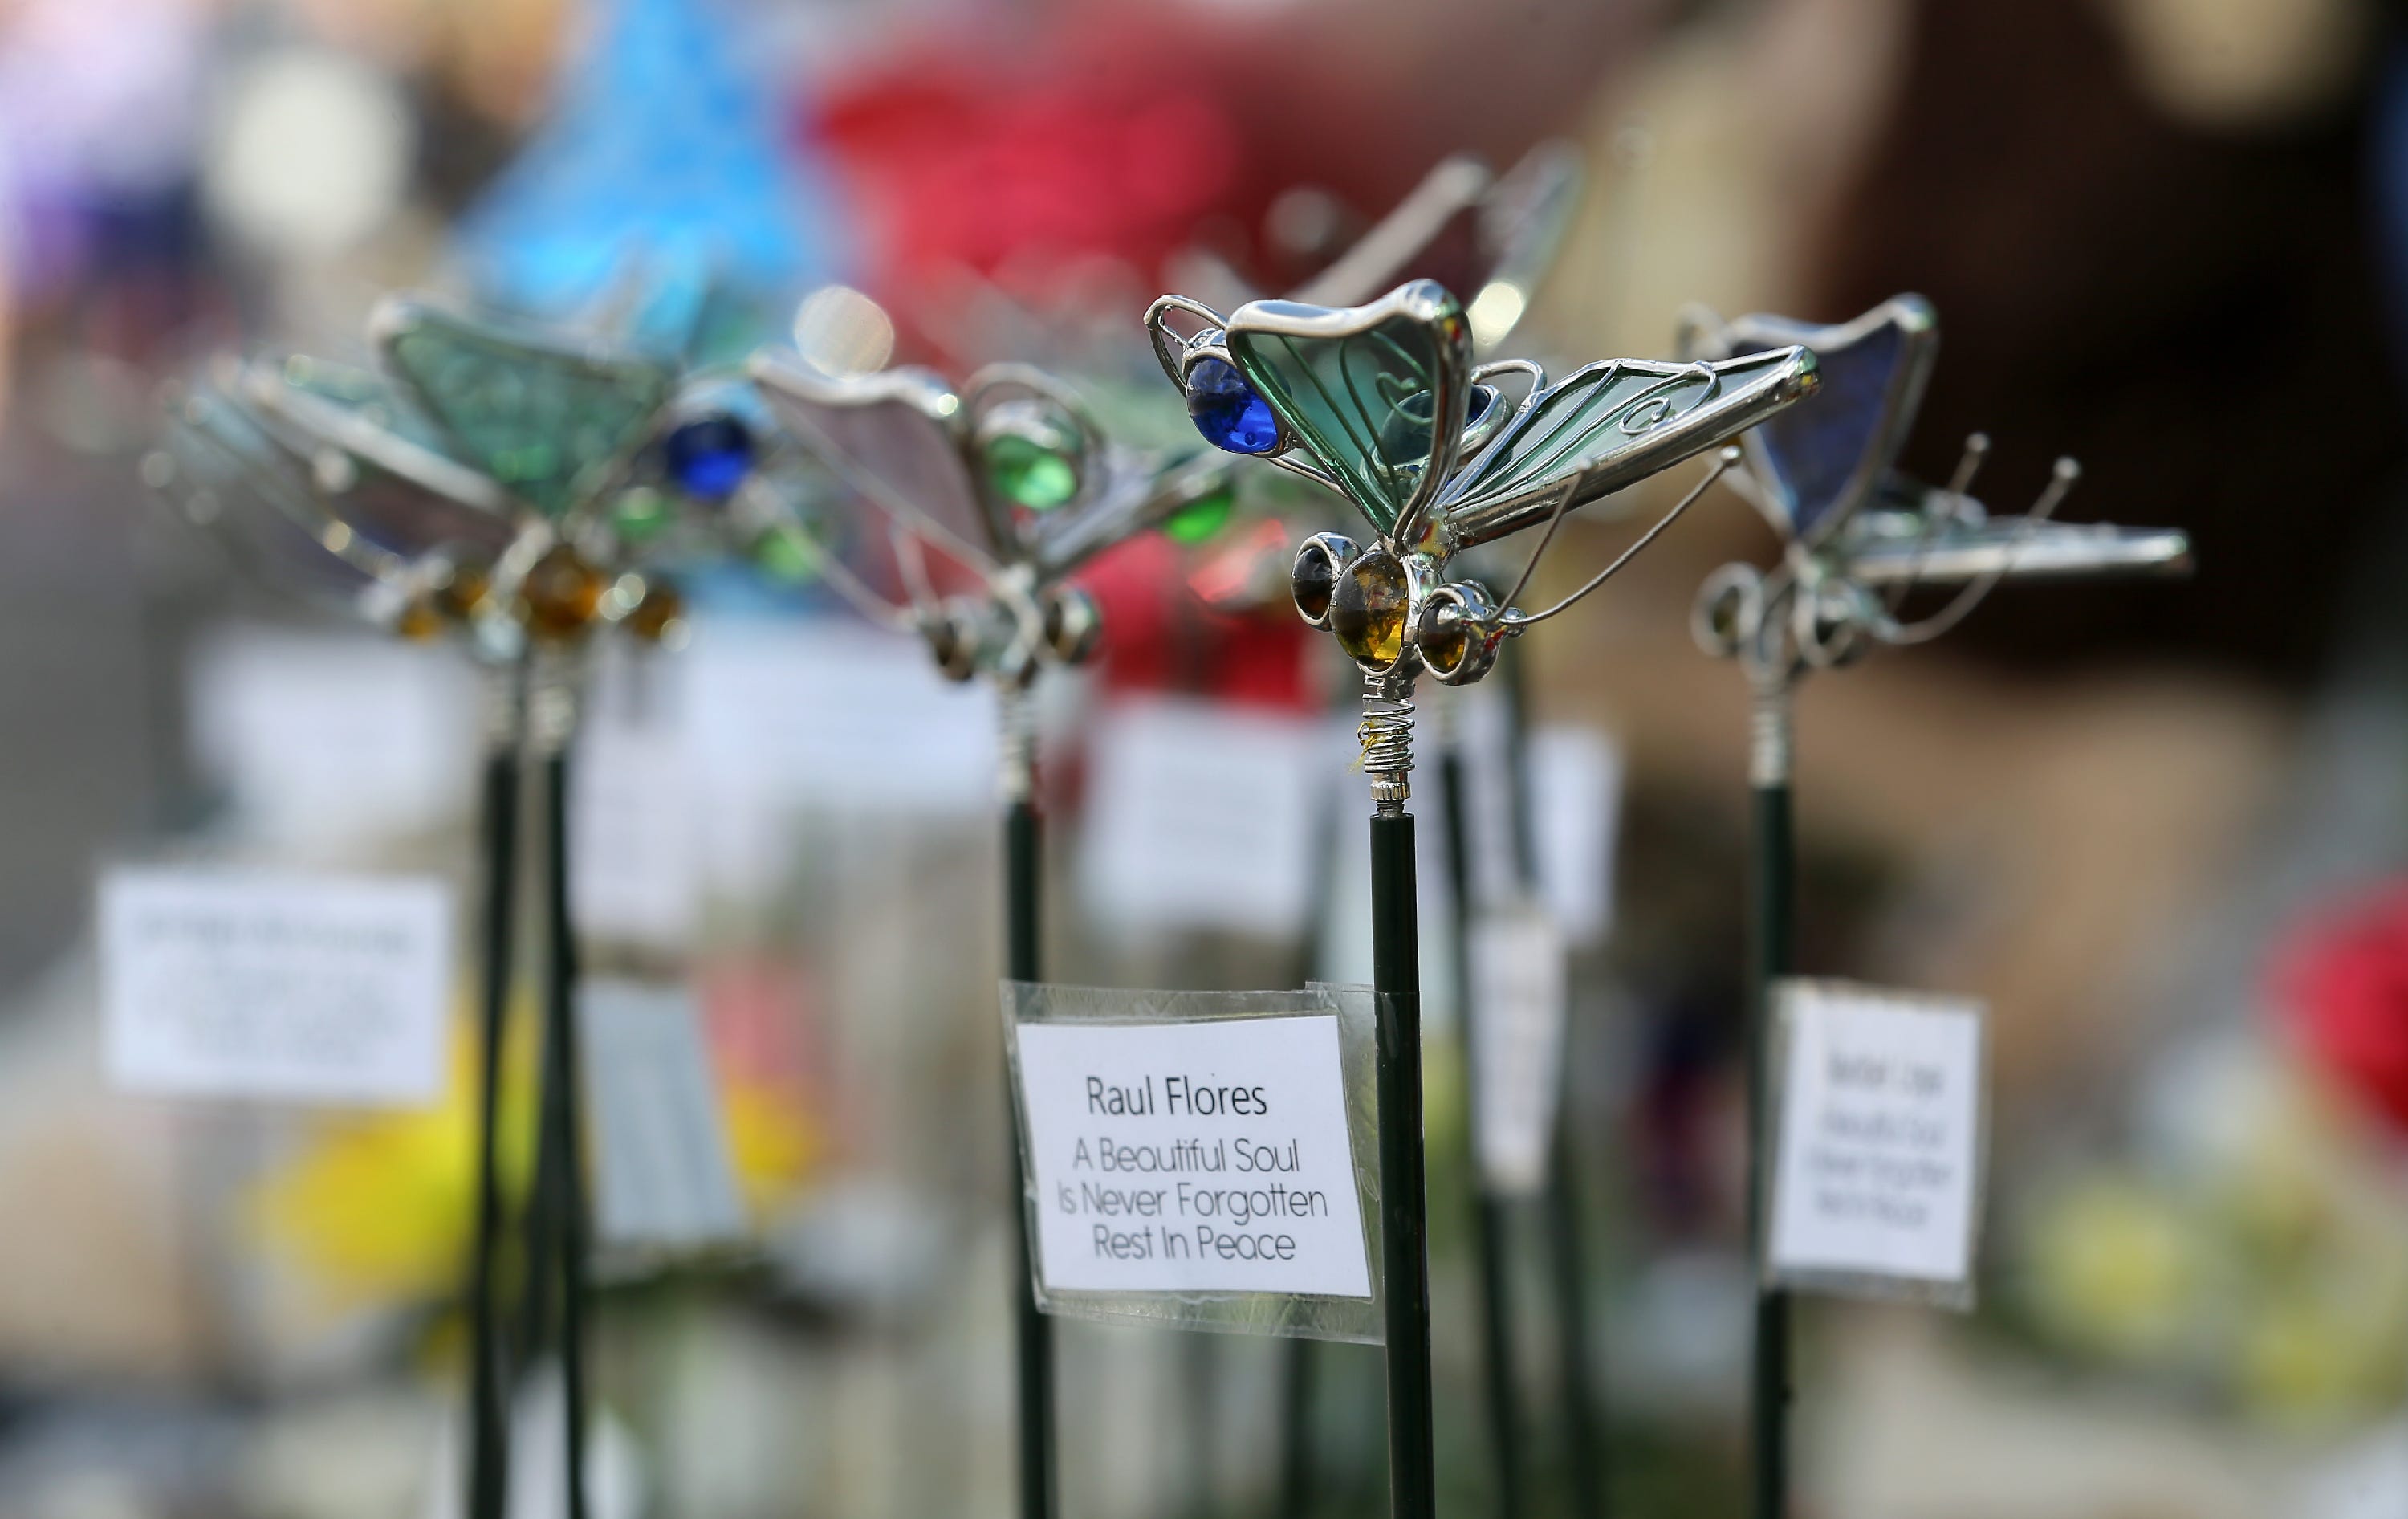 Twenty two glass butterfly garden stakes represent those killed in the attack at Walmart on August, 3. Each has the name of a victim attached to the stick. 